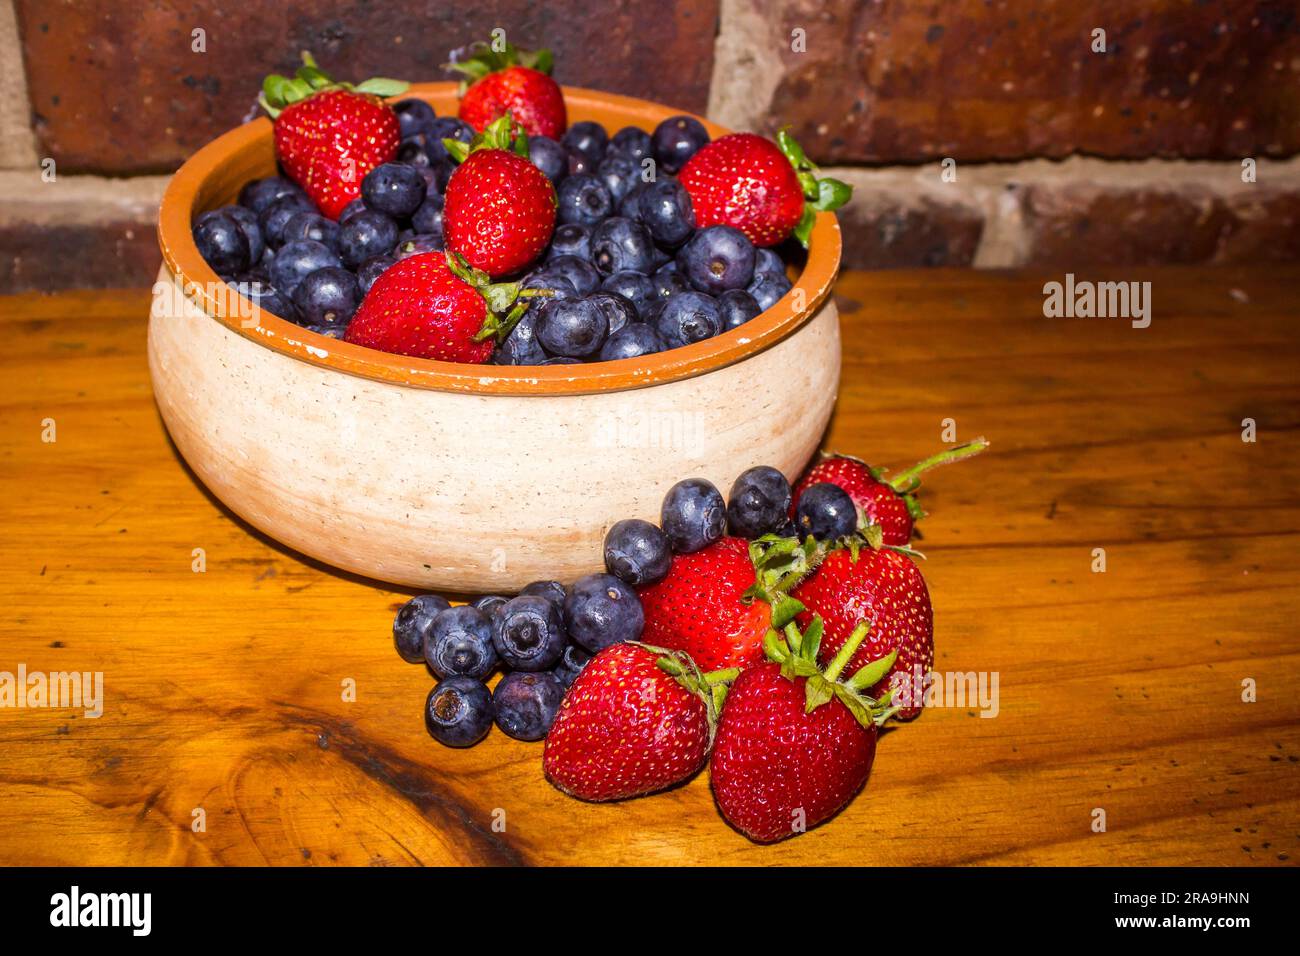 Rustic view of a bowl filled with sweet Strawberries and Blueberries Stock Photo